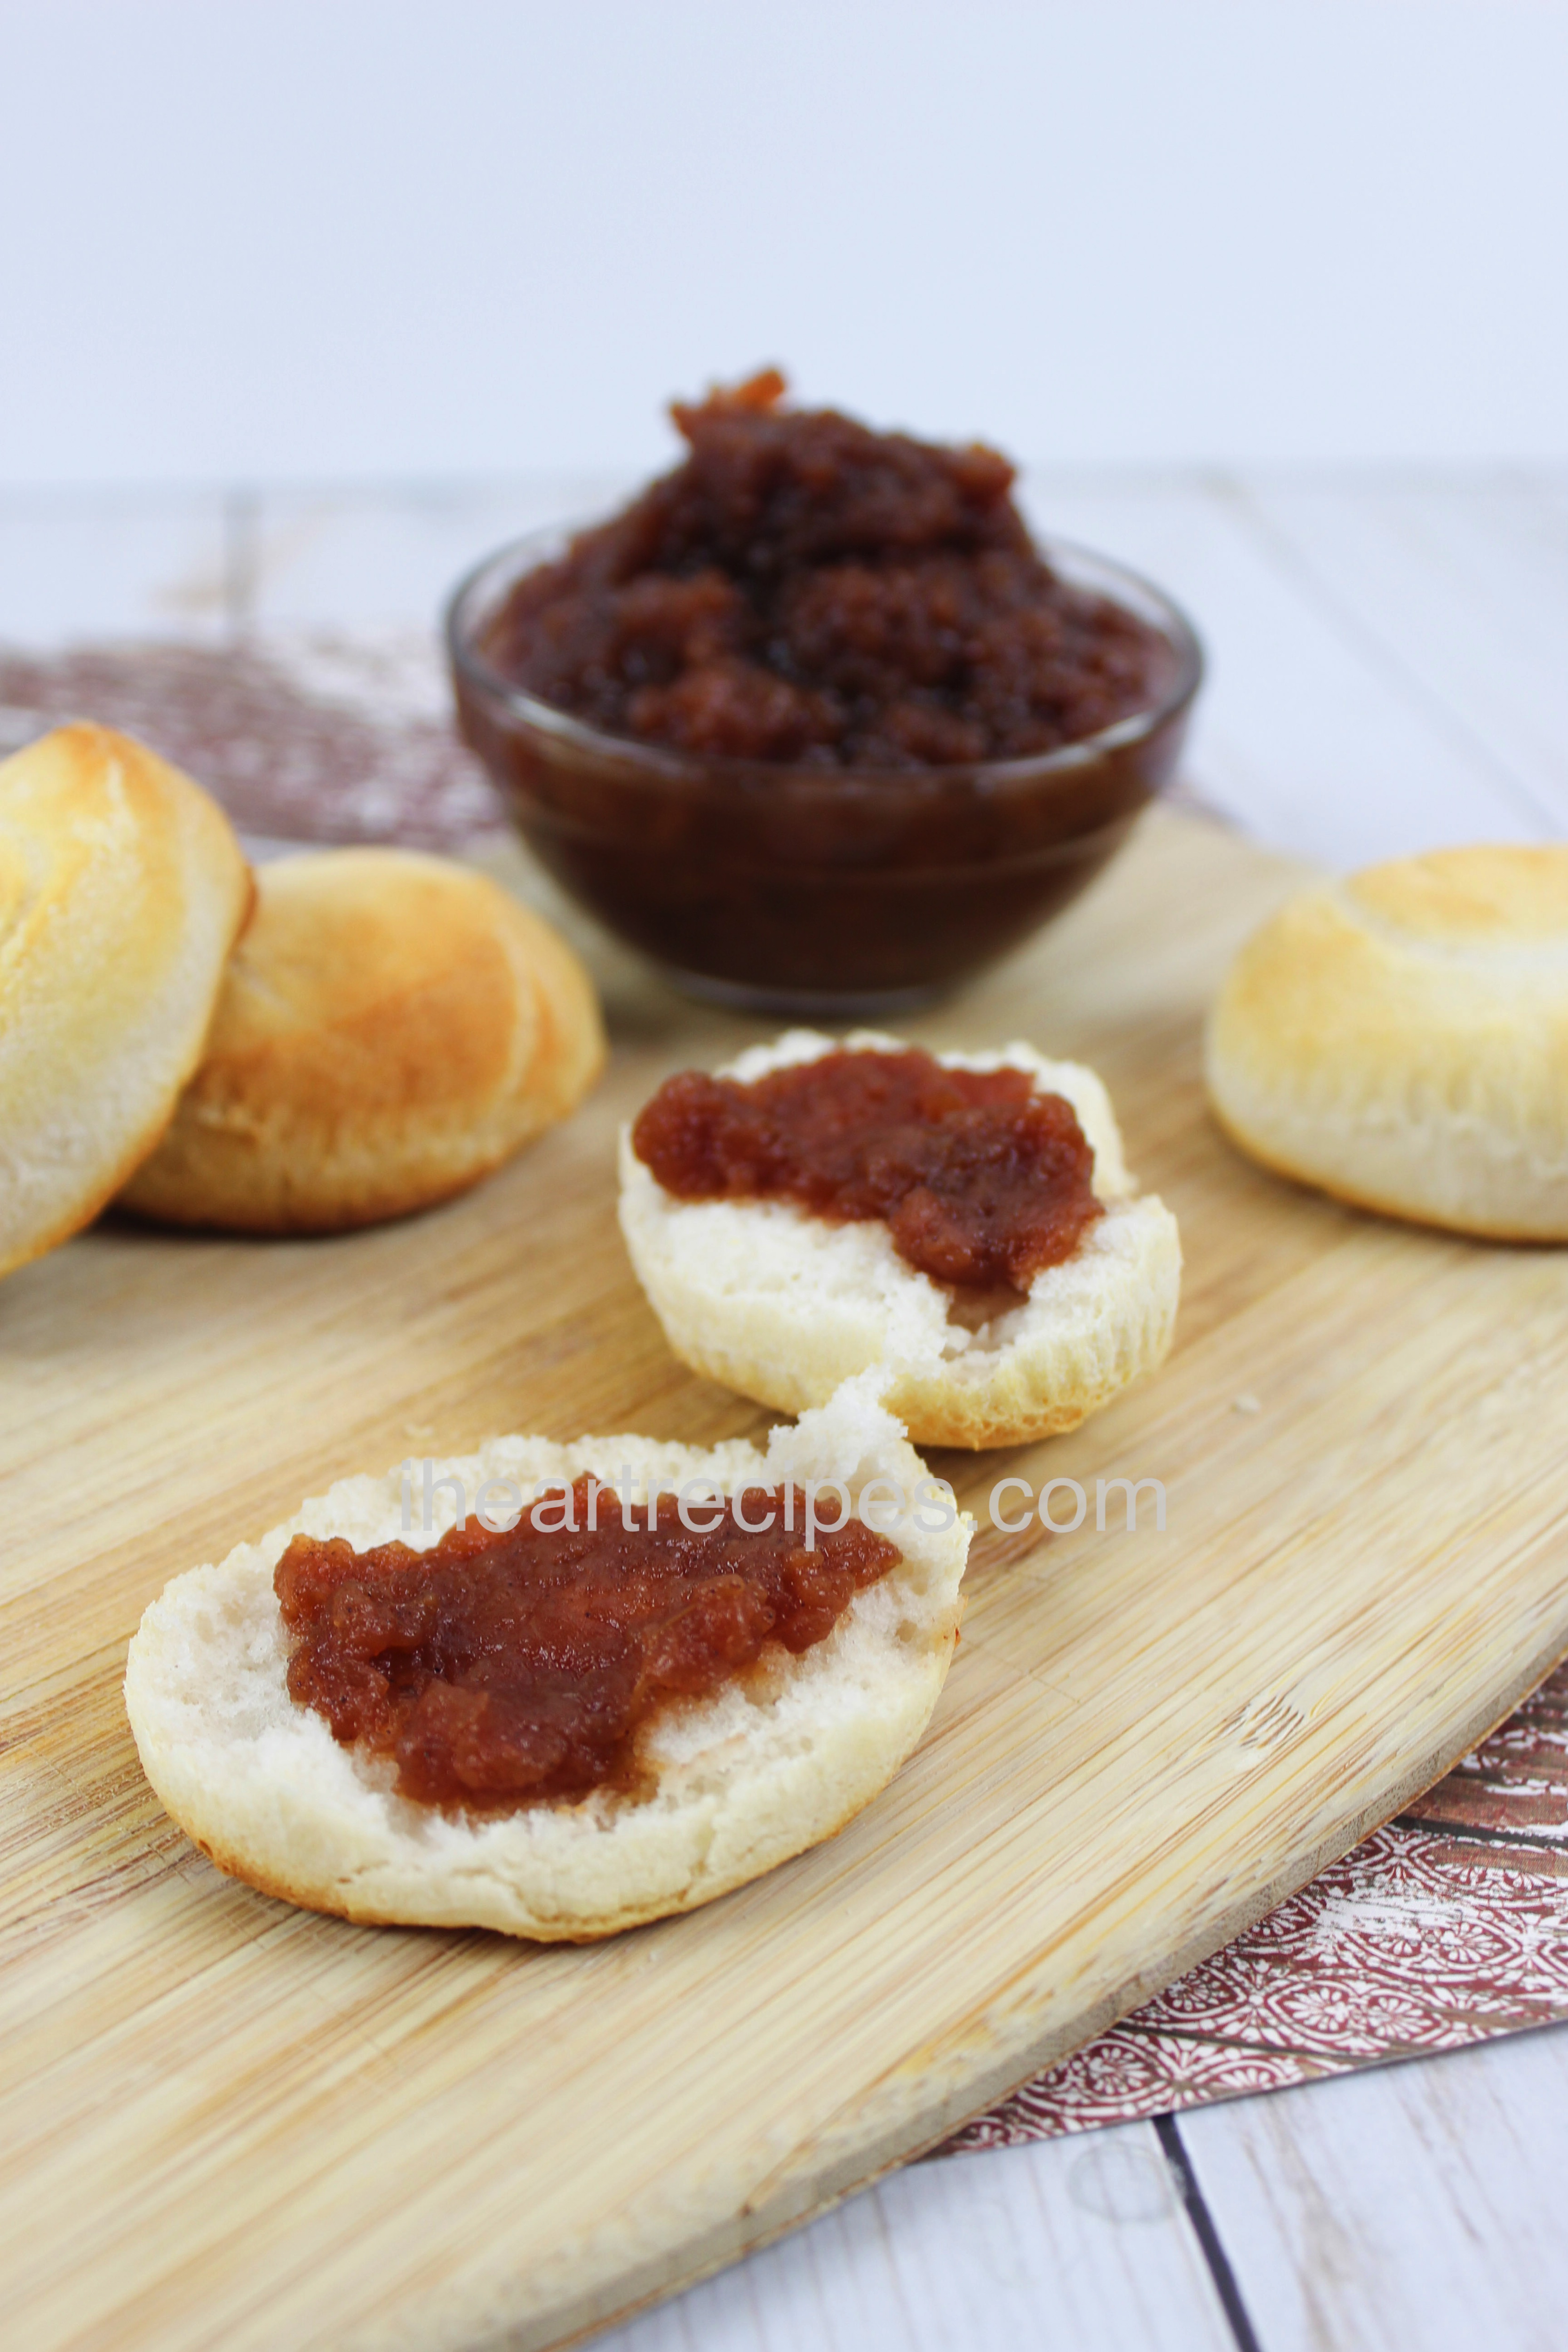 Slow cooked apple butter is perfect as a breakfast spread on homemade biscuits or rolls.